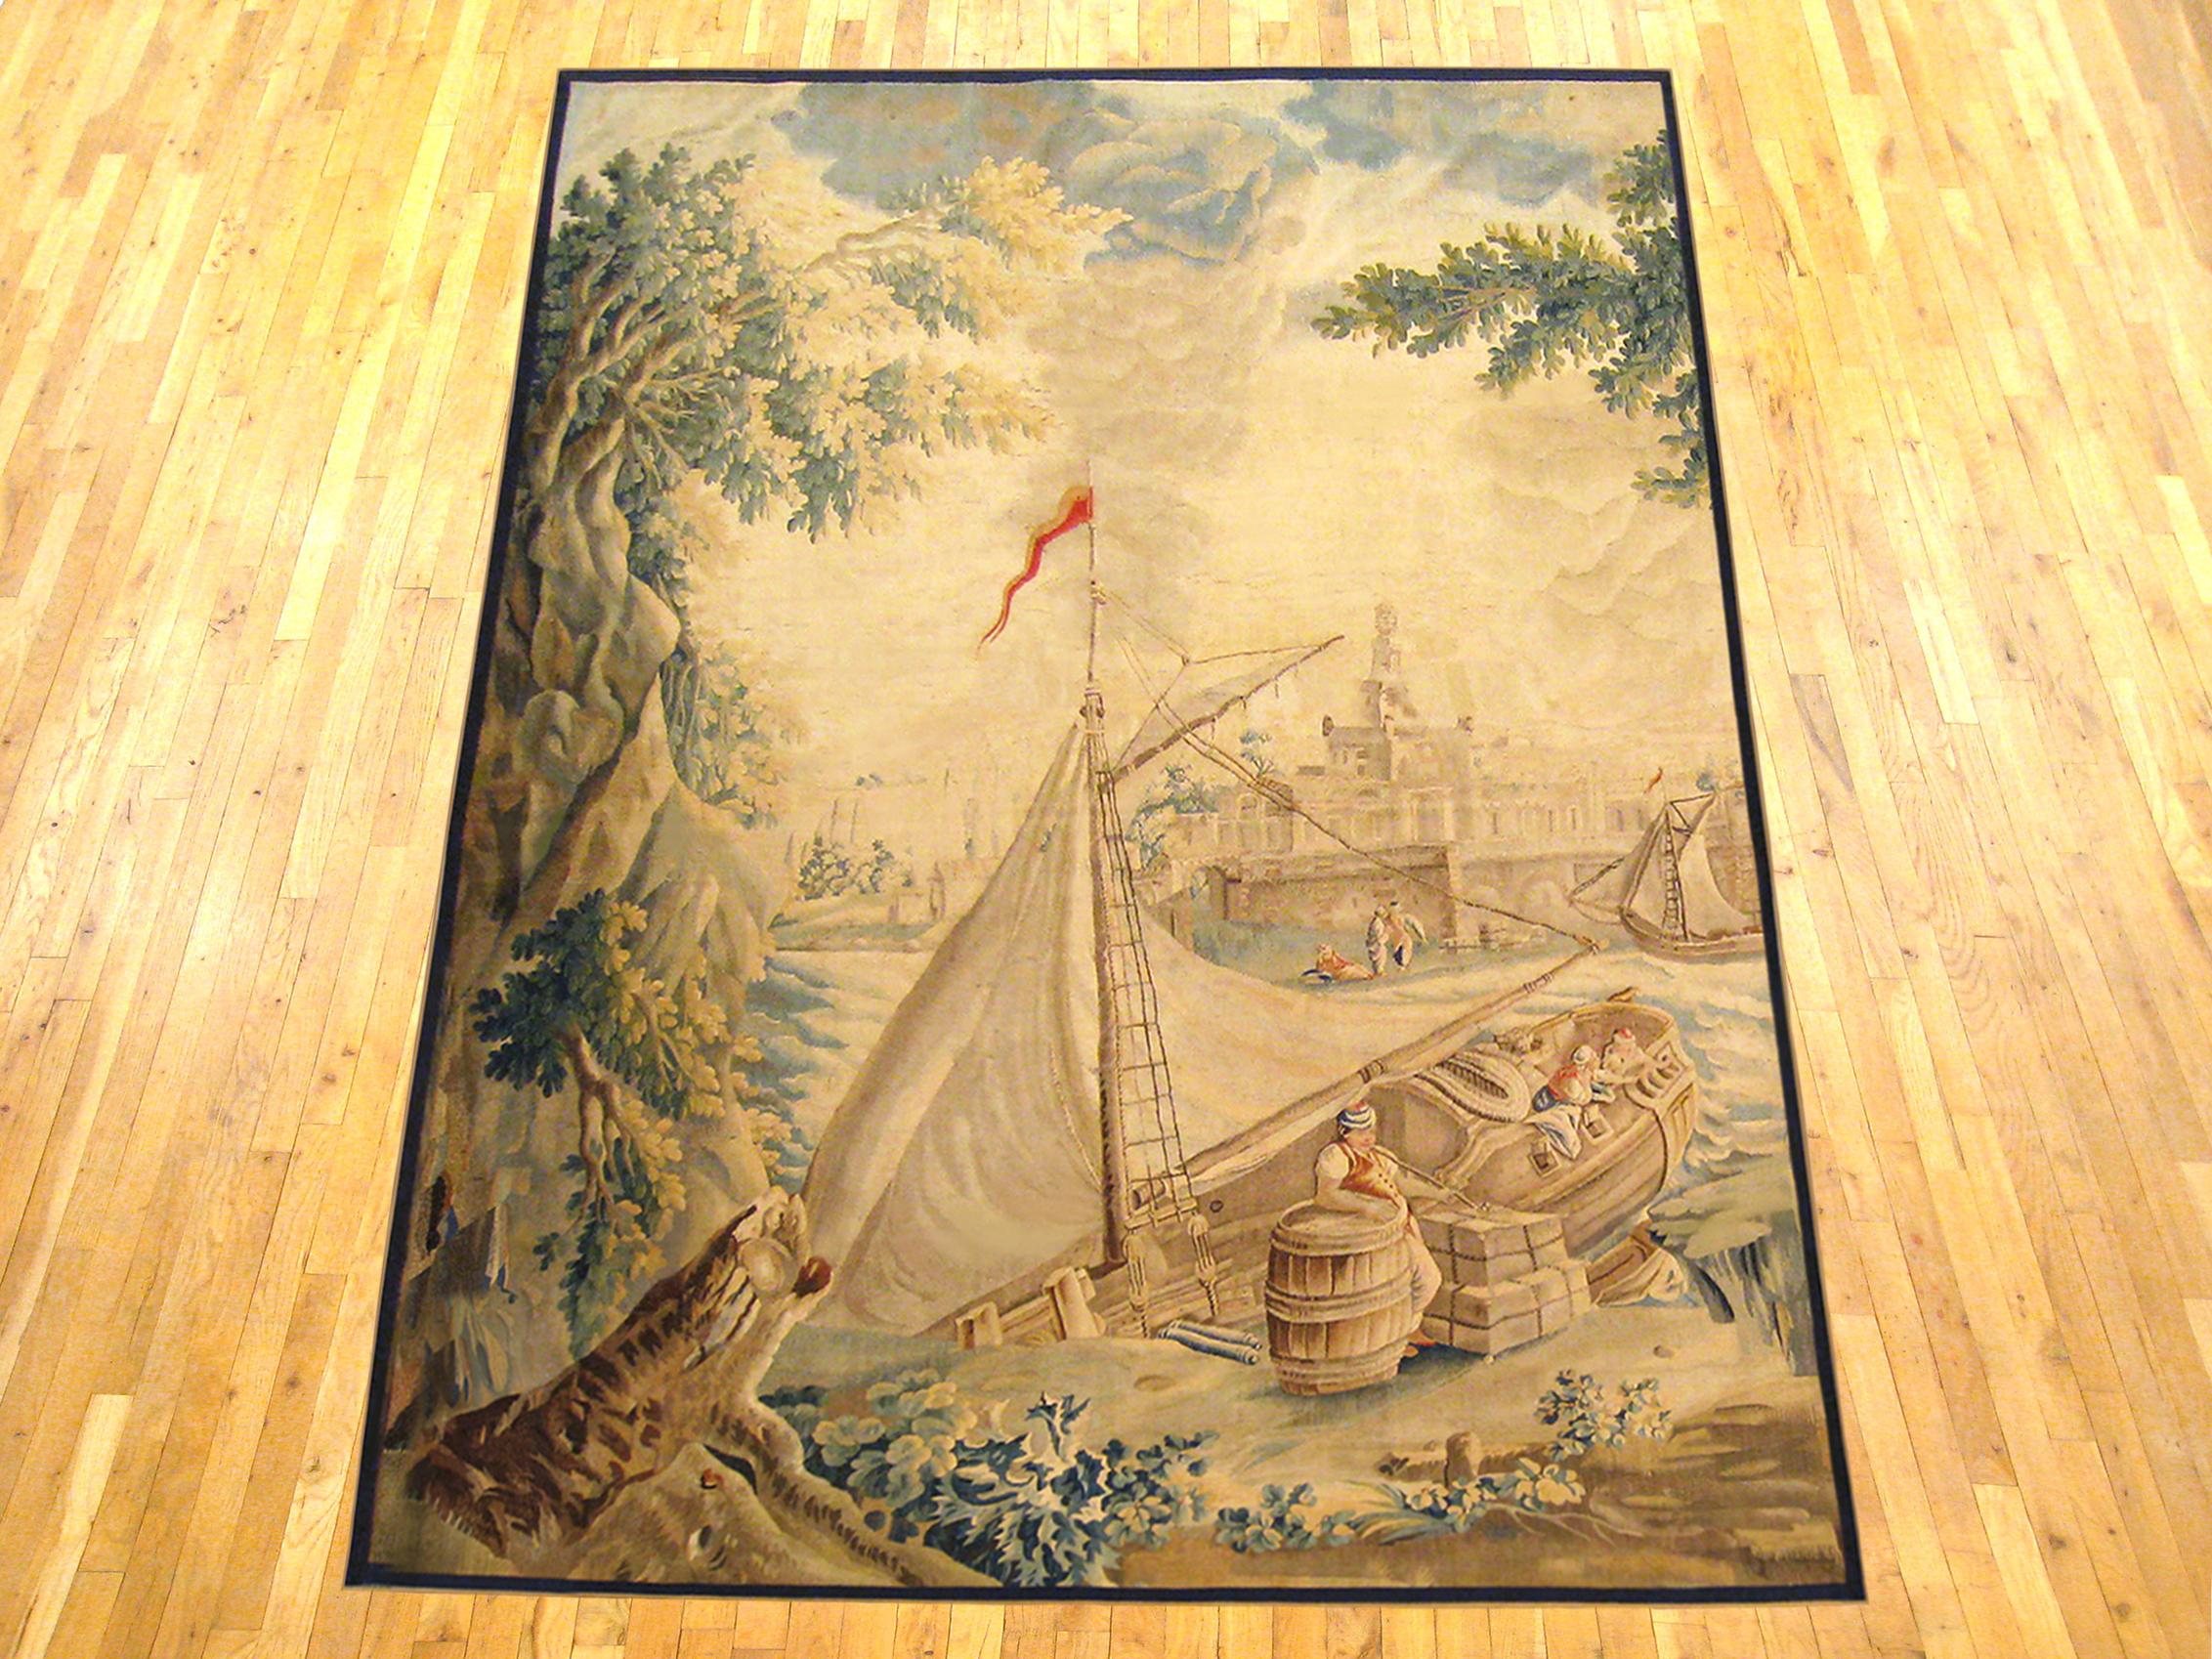 A French Aubusson rustic tapestry from the late 17th century, with the turbulent sea at center, and other ships docked by the riverside cityscape in the left distance. Enclosed by a narrow monochromatic border. Wool with silk inlay. Measures: 10’1”